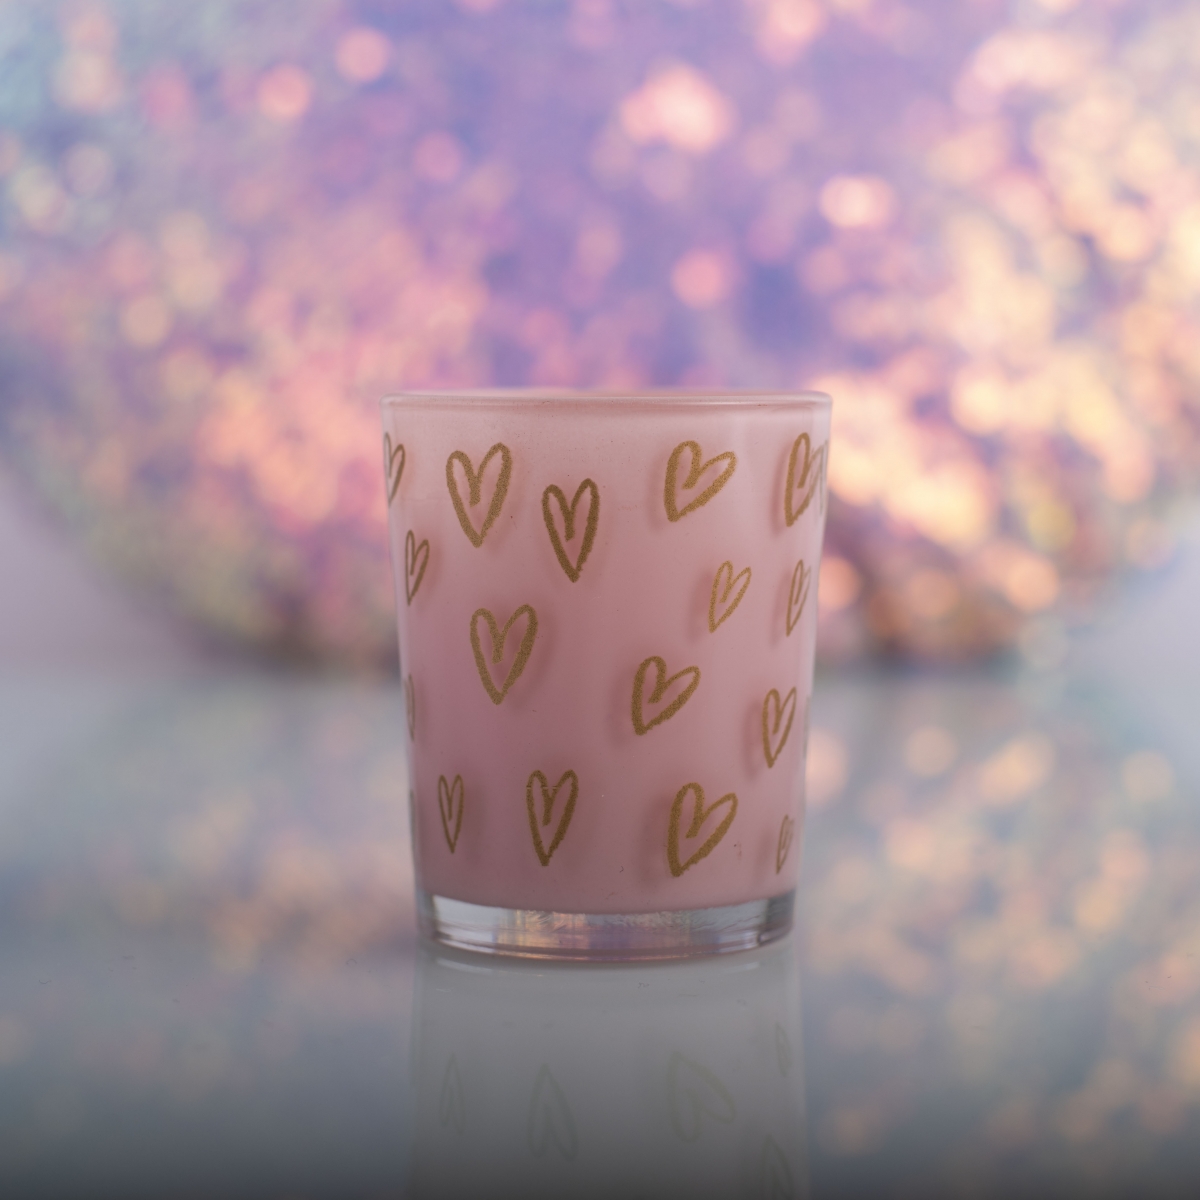 Valentine Candles : Pink Heart Glass , Romantic Ambience ,China Factory , Wholesale Price-HOWCANDLE-Candles,Scented Candles,Aromatherapy Candles,Soy Candles,Vegan Candles,Jar Candles,Pillar Candles,Candle Gift Sets,Essential Oils,Reed Diffuser,Candle Holder,